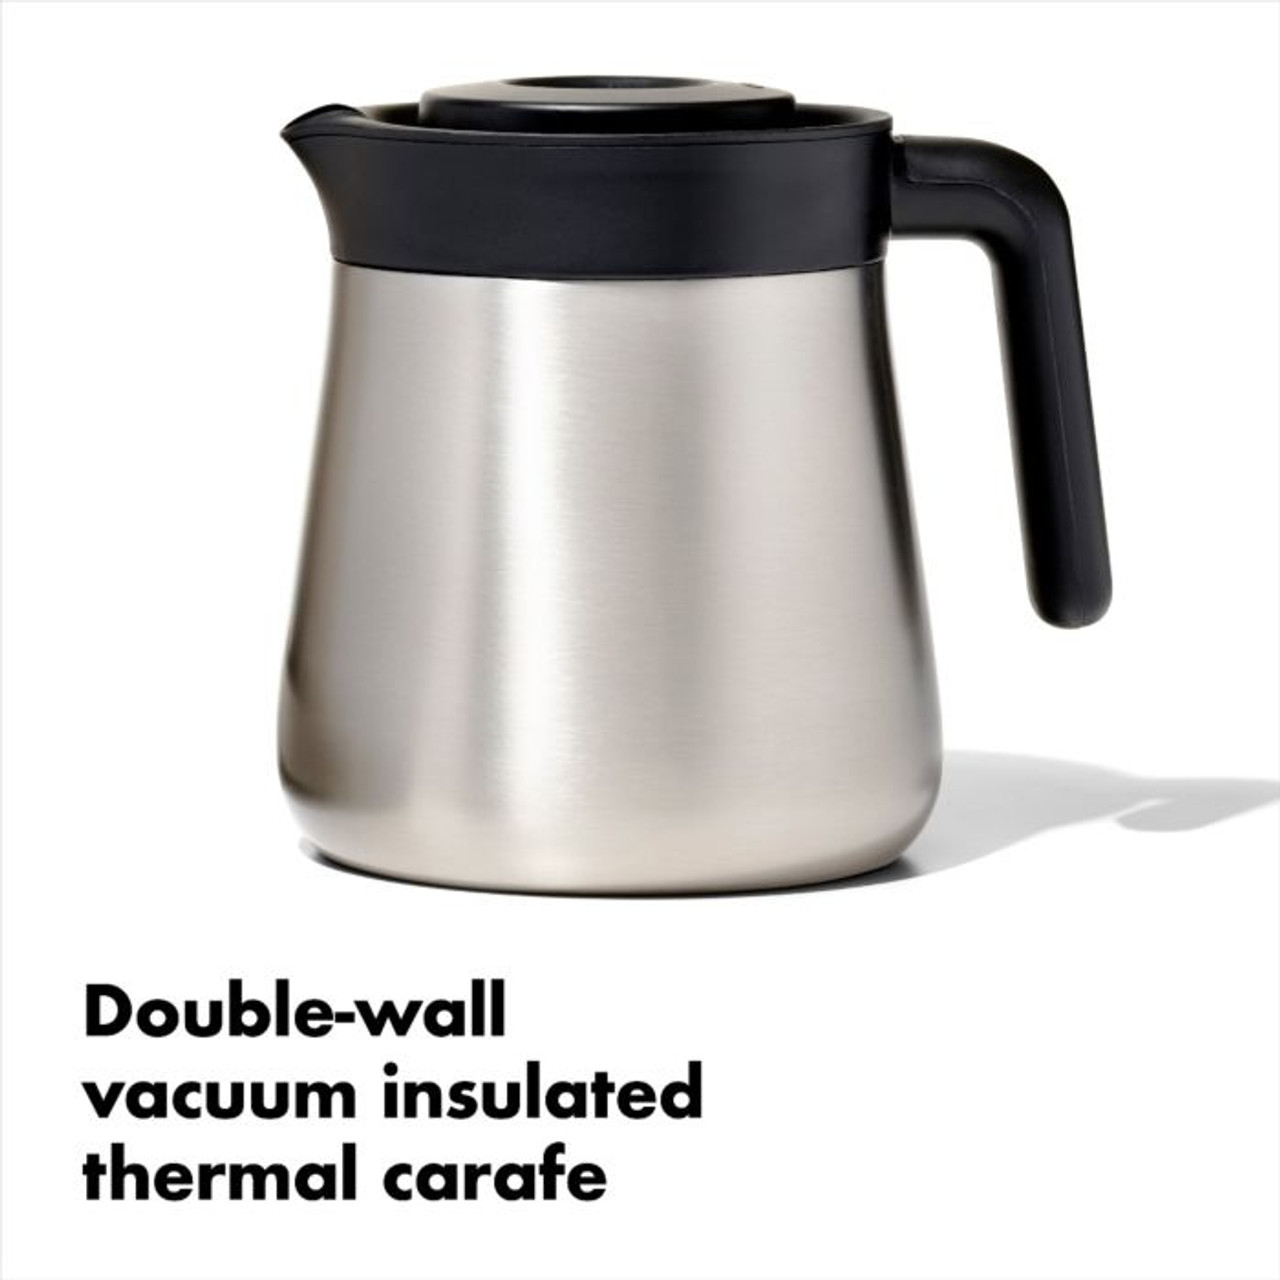 Stainless Steel Thermal Coffee Carafe - Double Walled Vacuum